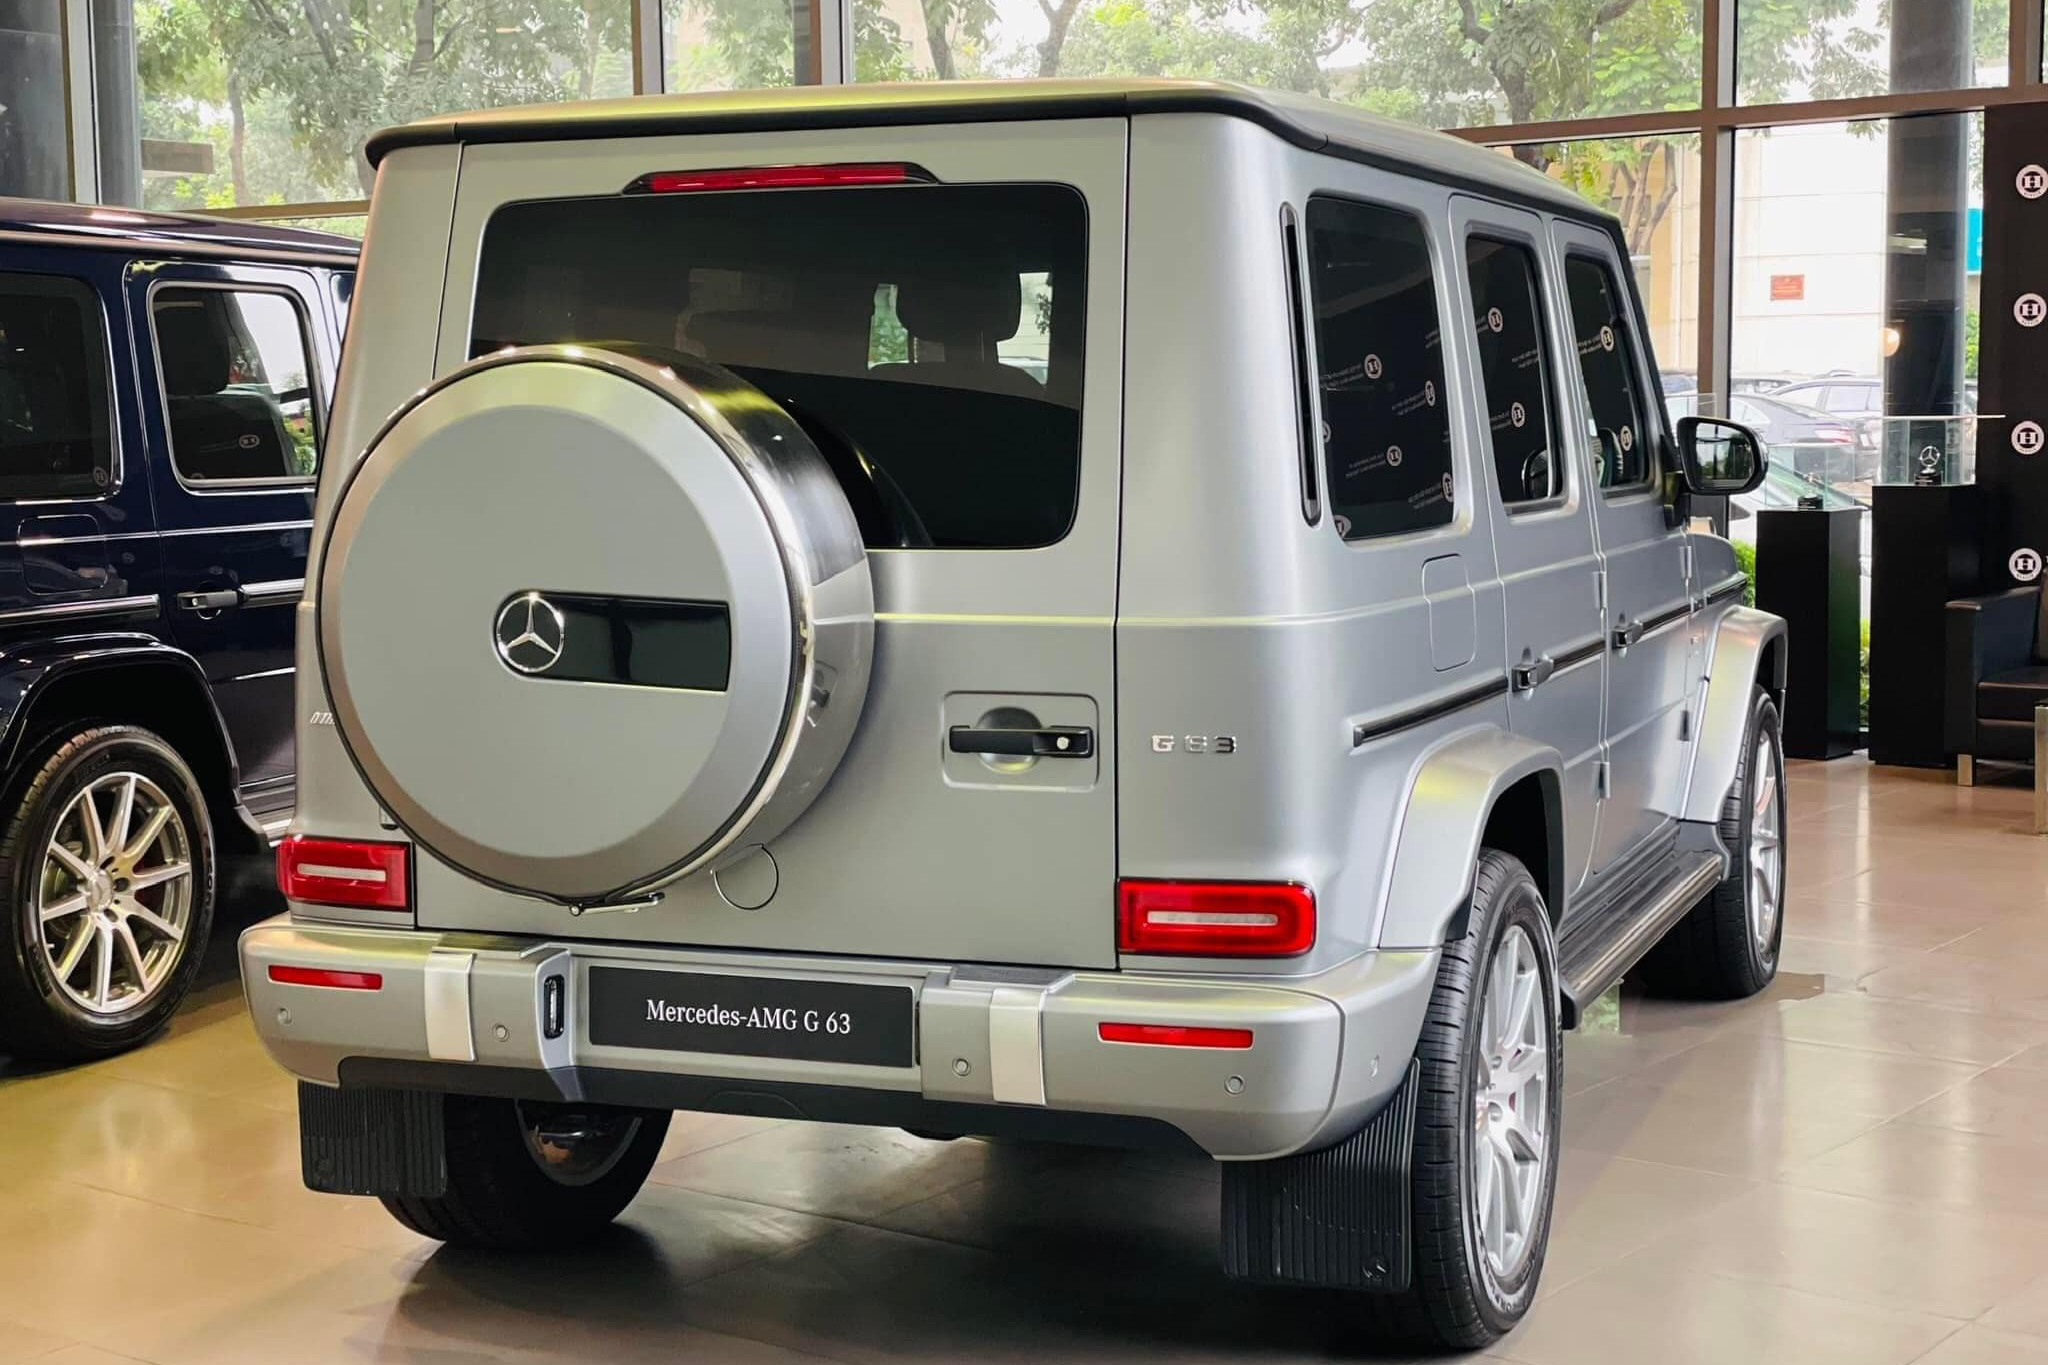 mercedes-amg-g-63-phan-phoi-chinh-hang-cafeautovn-6